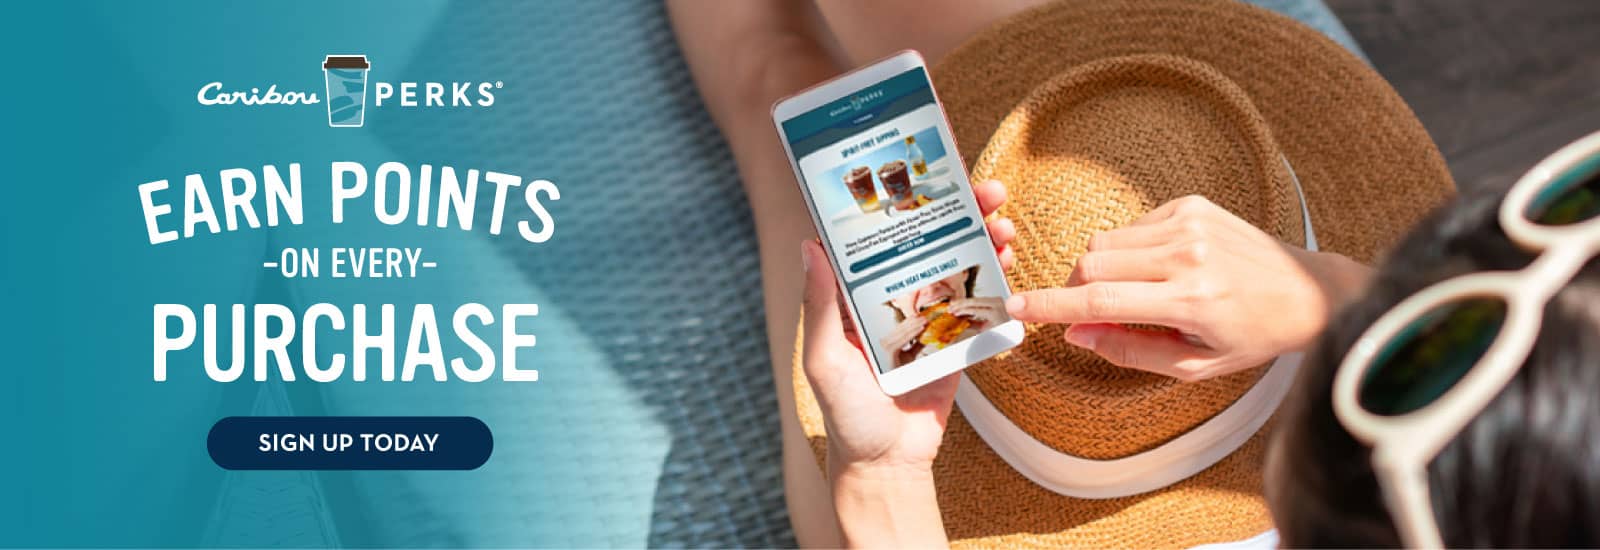 Earn points on every purchase. Sign up for Caribou Perks today.